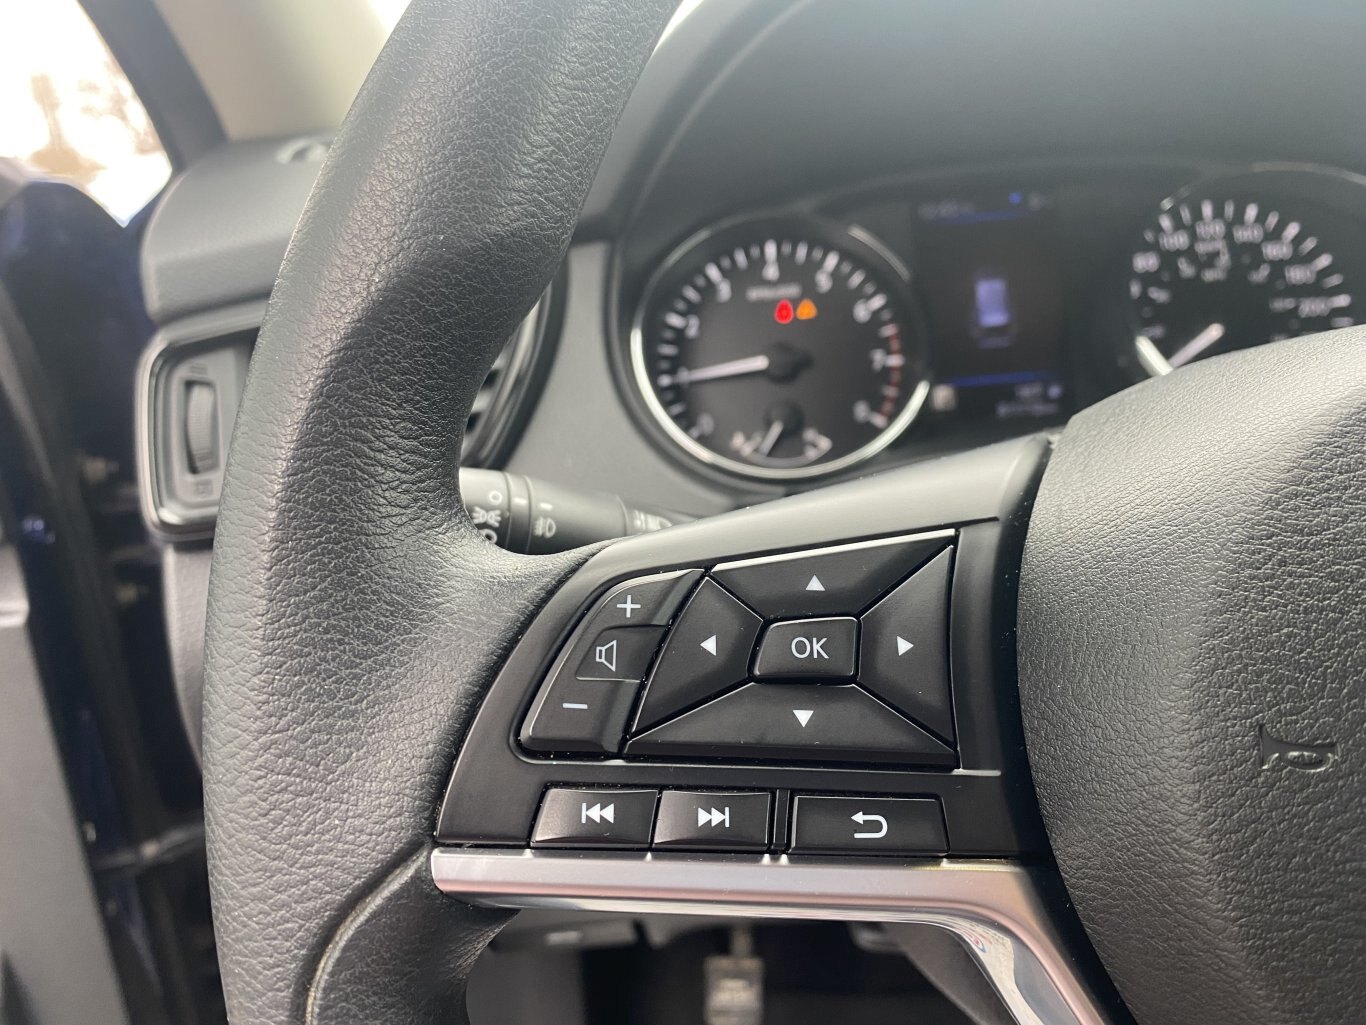 2018 NISSAN ROGUE SV AWD WITH HEATED SEATS AND REAR VIEW CAMERA!!